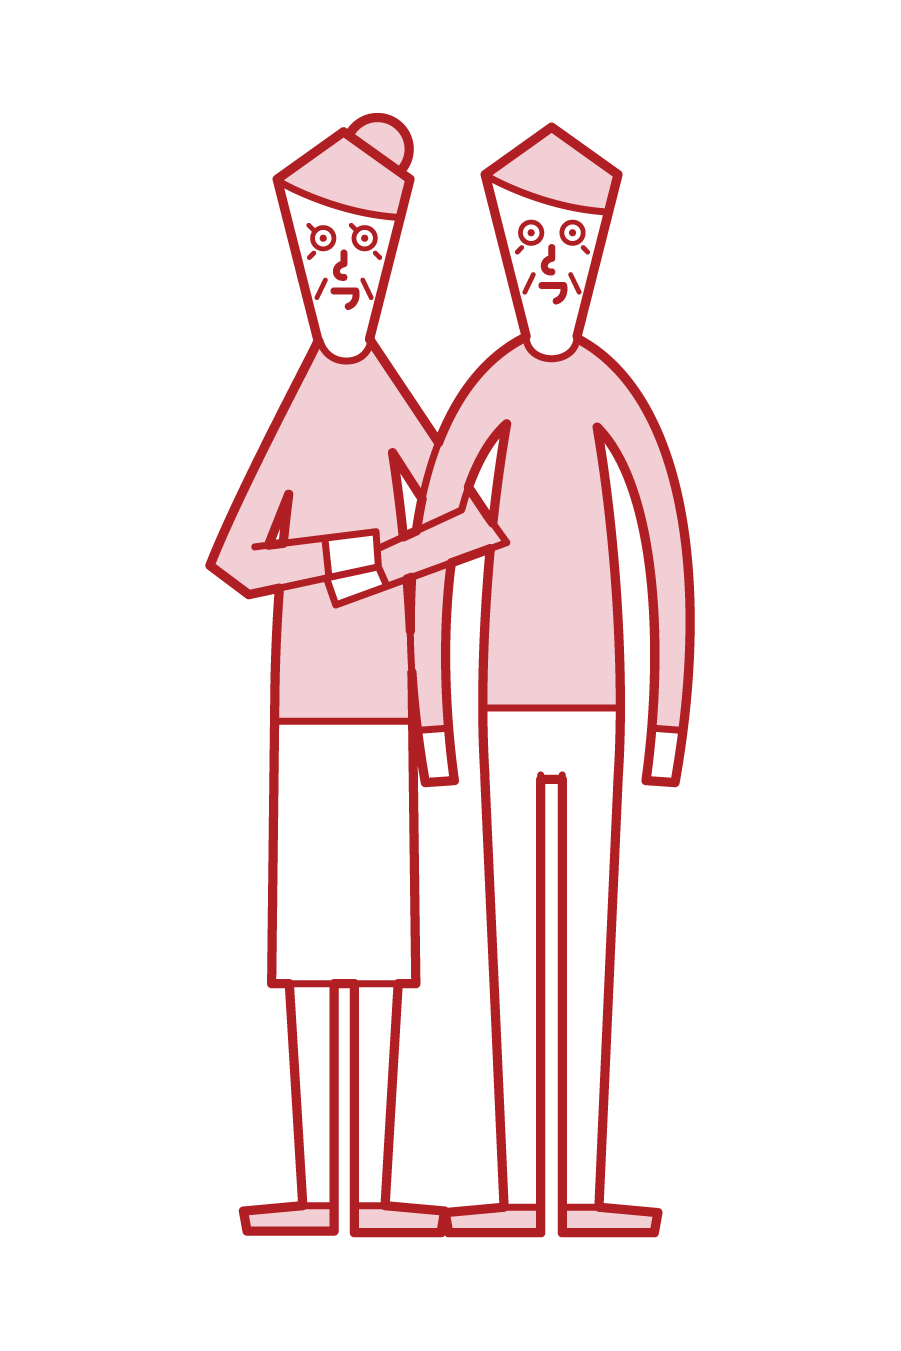 Illustration of an old couple who are good friends